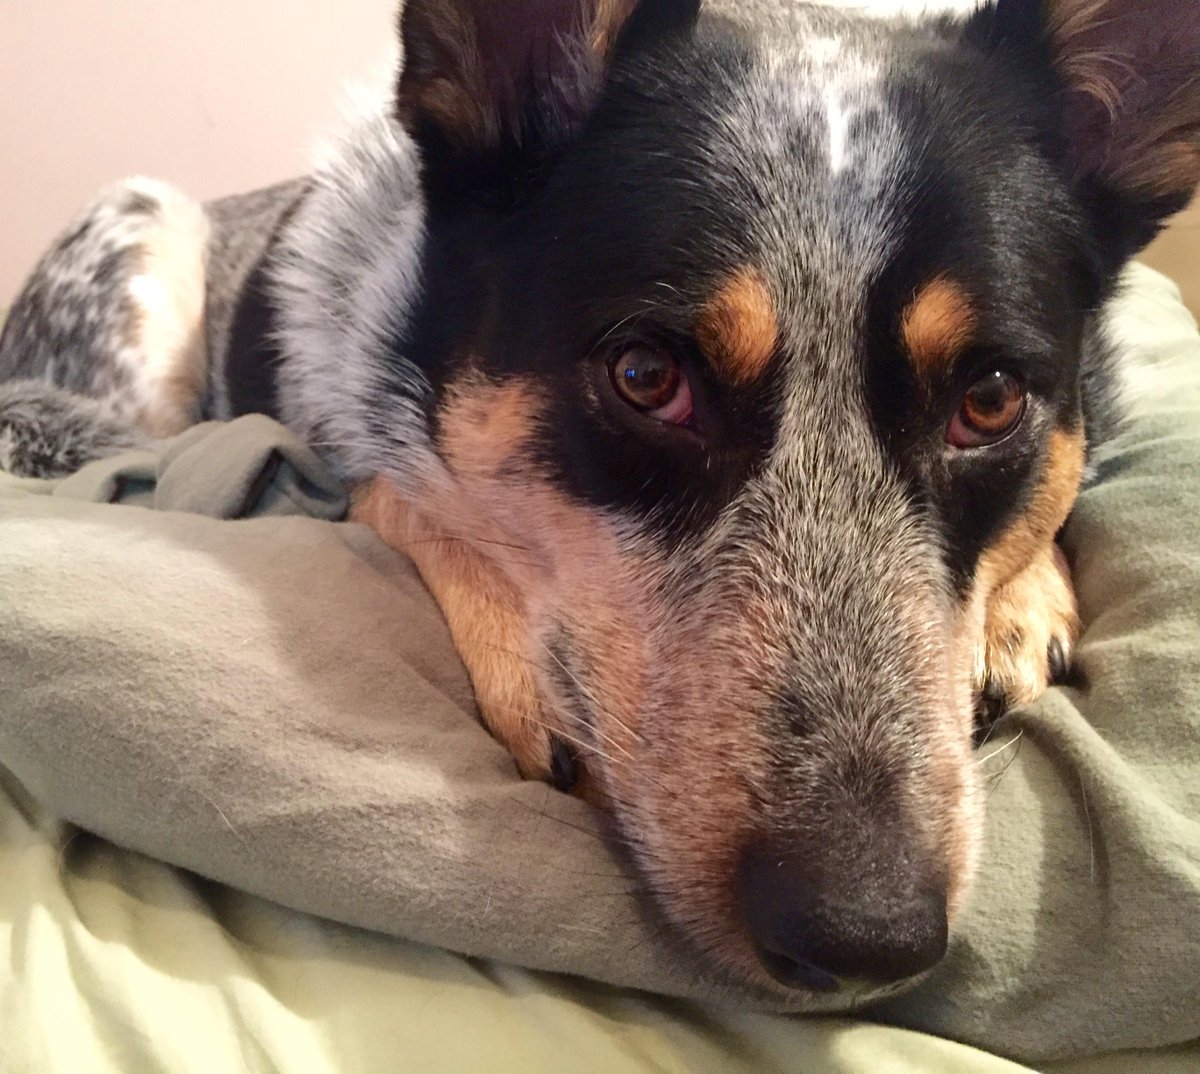 Bj Nemeth On Twitter Now Briscomutt Is On My Bed Watching Over